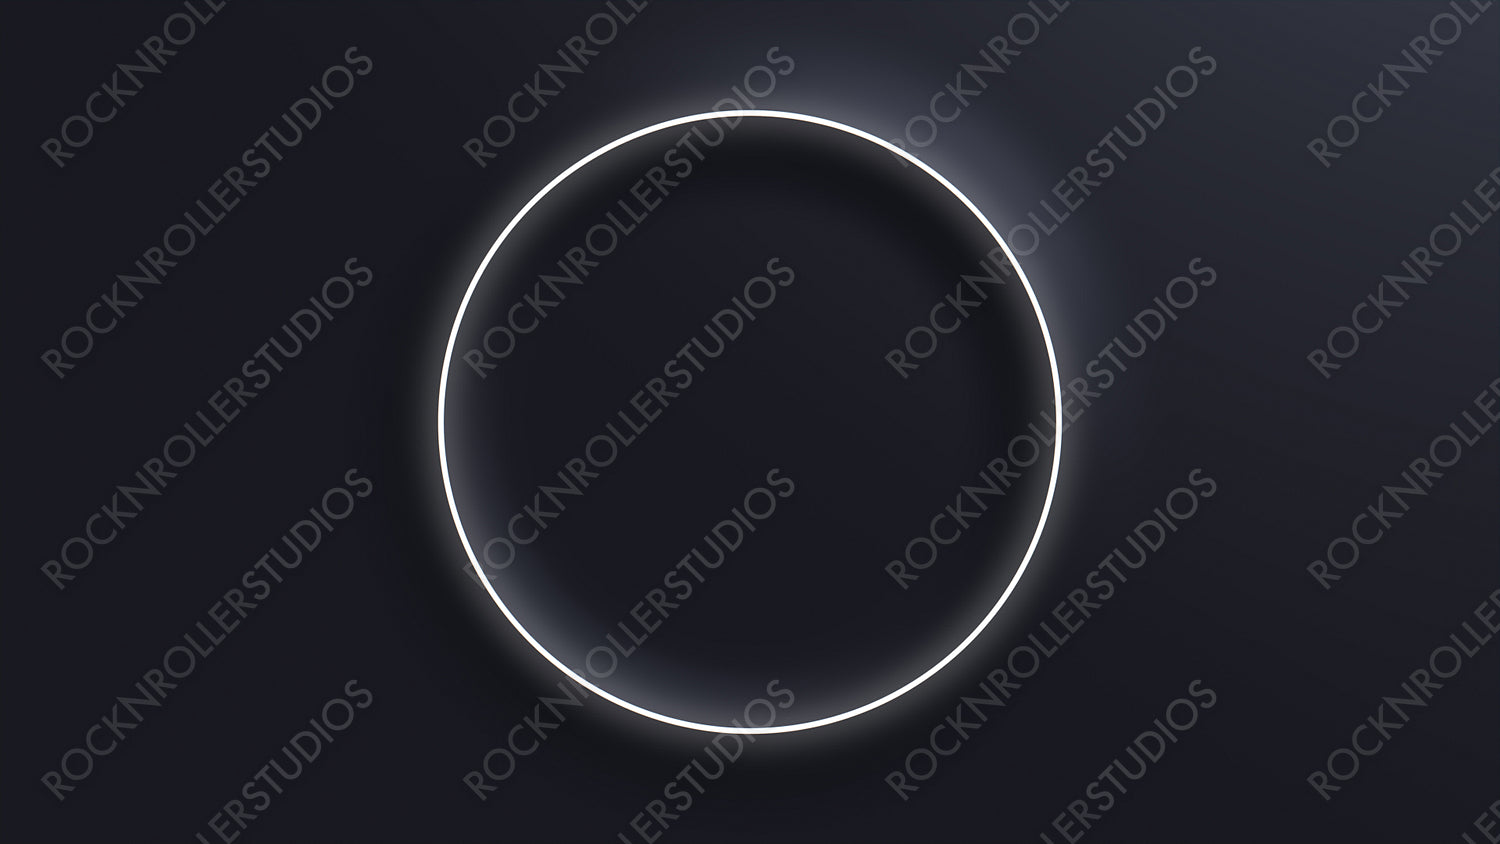 Black Surface with Embossed Shape and White Illuminated Edge. Tech Background with Neon Circle. 3D Render.